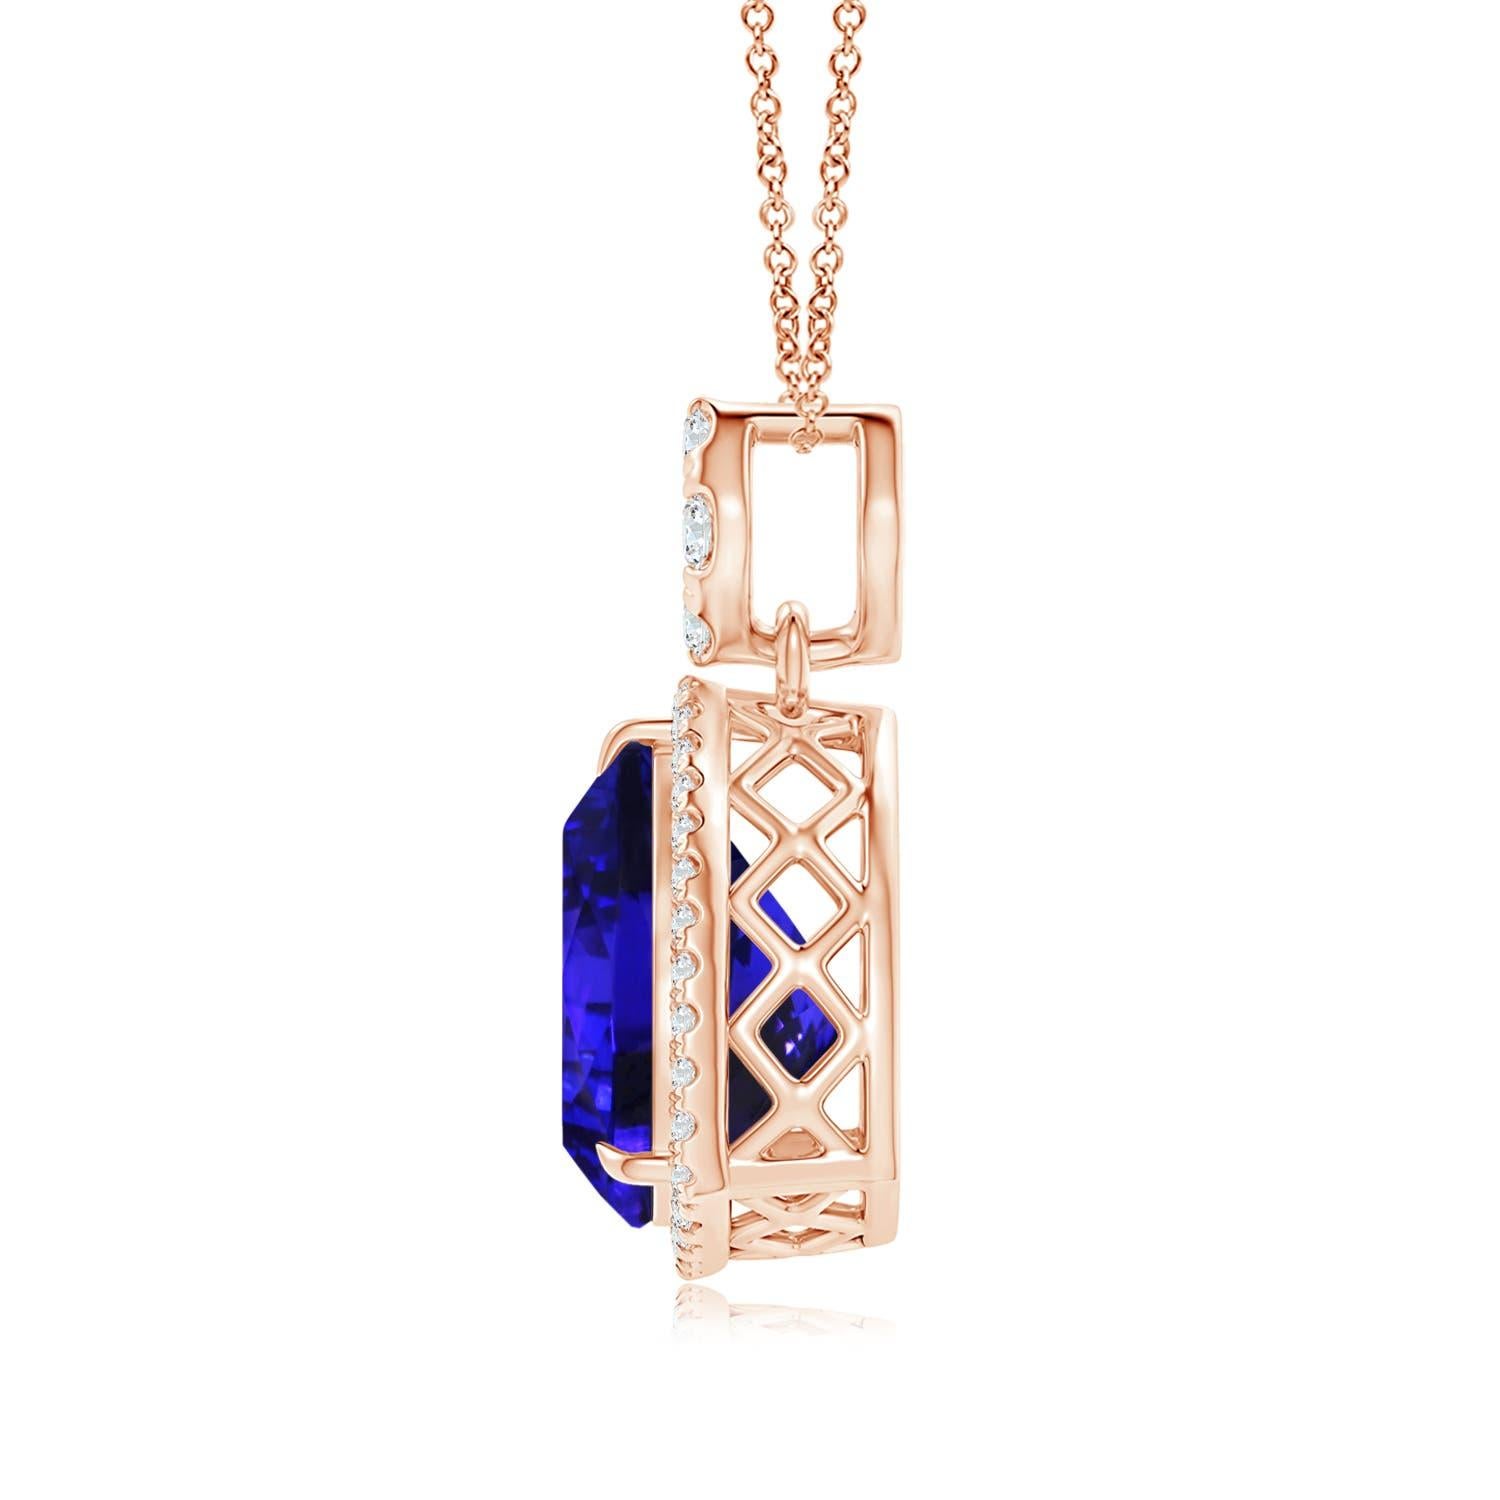 Connected to a diamond-studded bale is a GIA certified trillion tanzanite halo pendant in 18k rose gold. While the halo diamonds are secured in U pave settings, the bale features prong-set diamonds in a cluster. The chequered filigree on the metal